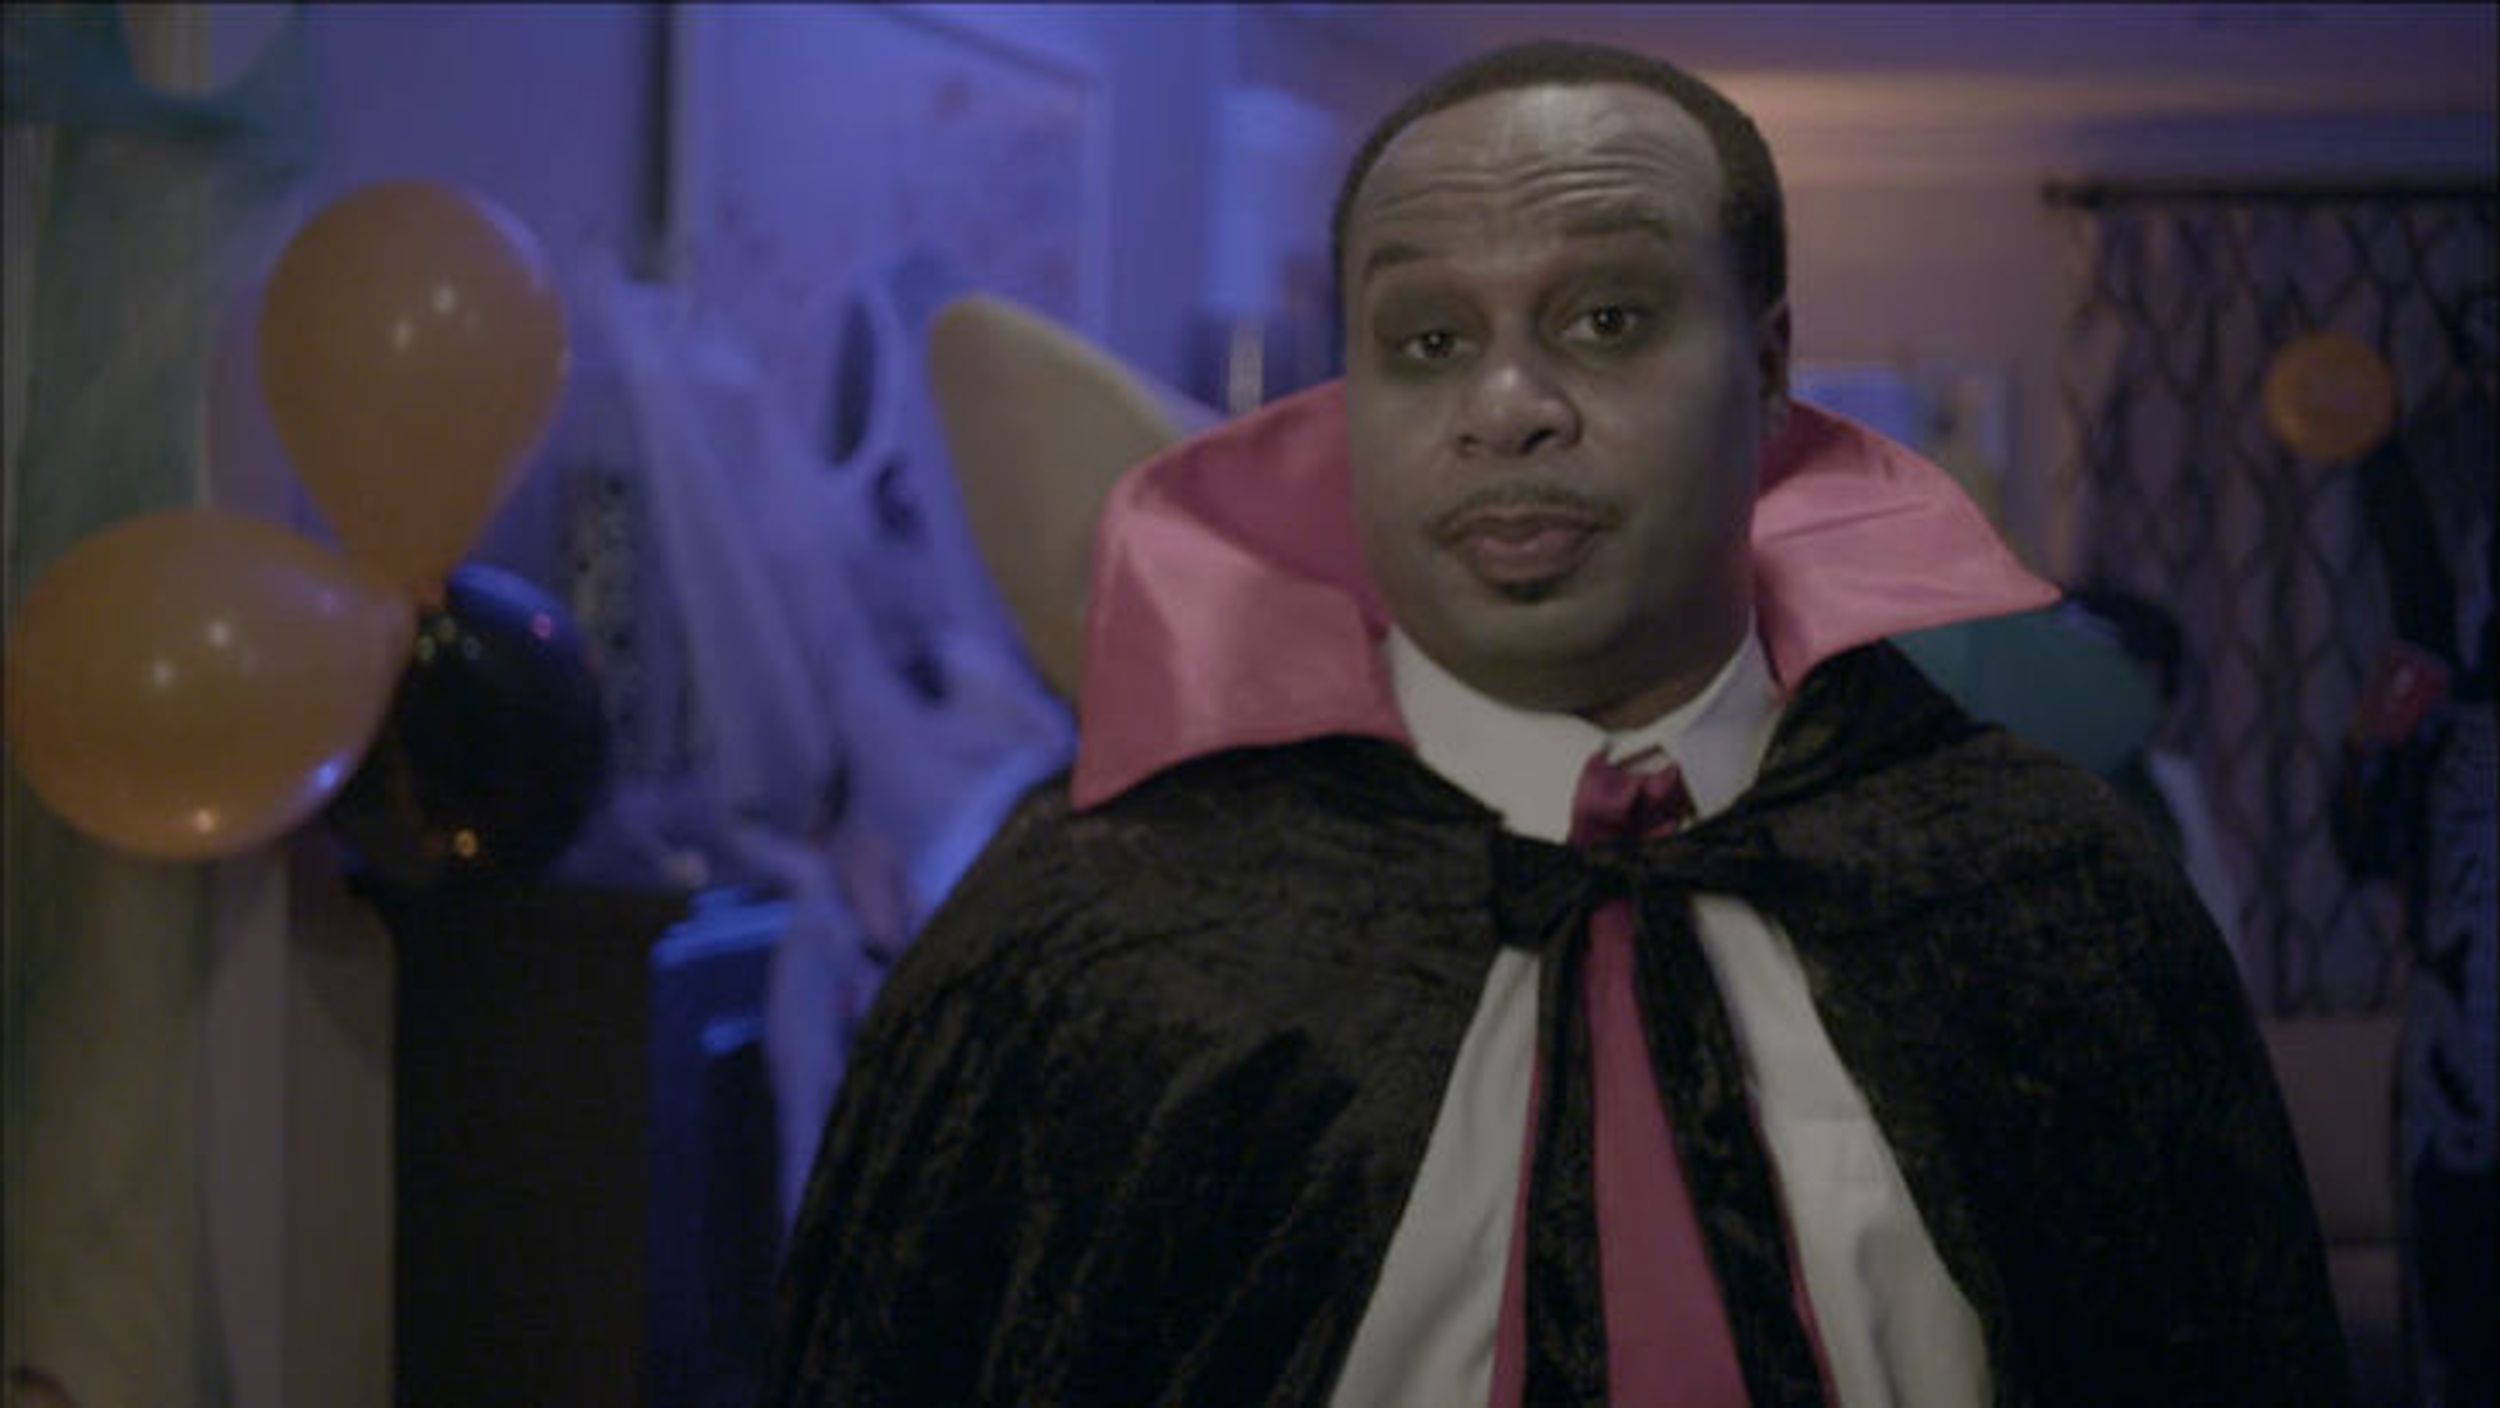 WATCH: 'Daily Show' Says Why Not to Wear Blackface on Halloween